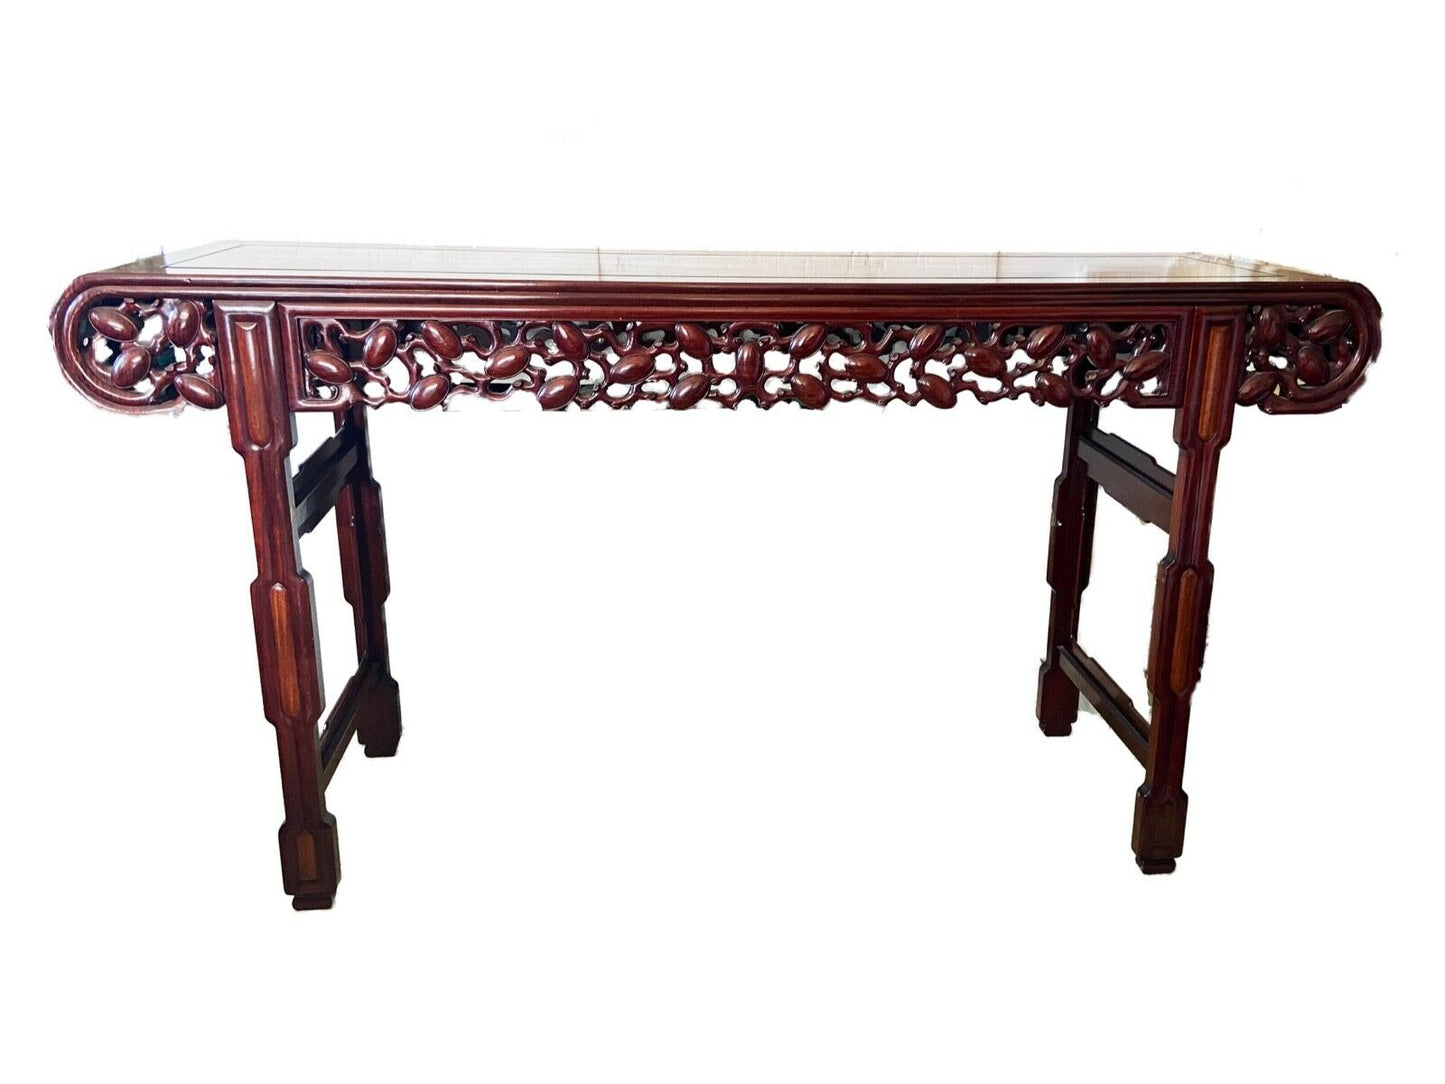 #932 Lg Chinese Vintage Huanghuali & Zitan Wood Altar Console Table 76.25" W by 40.5"